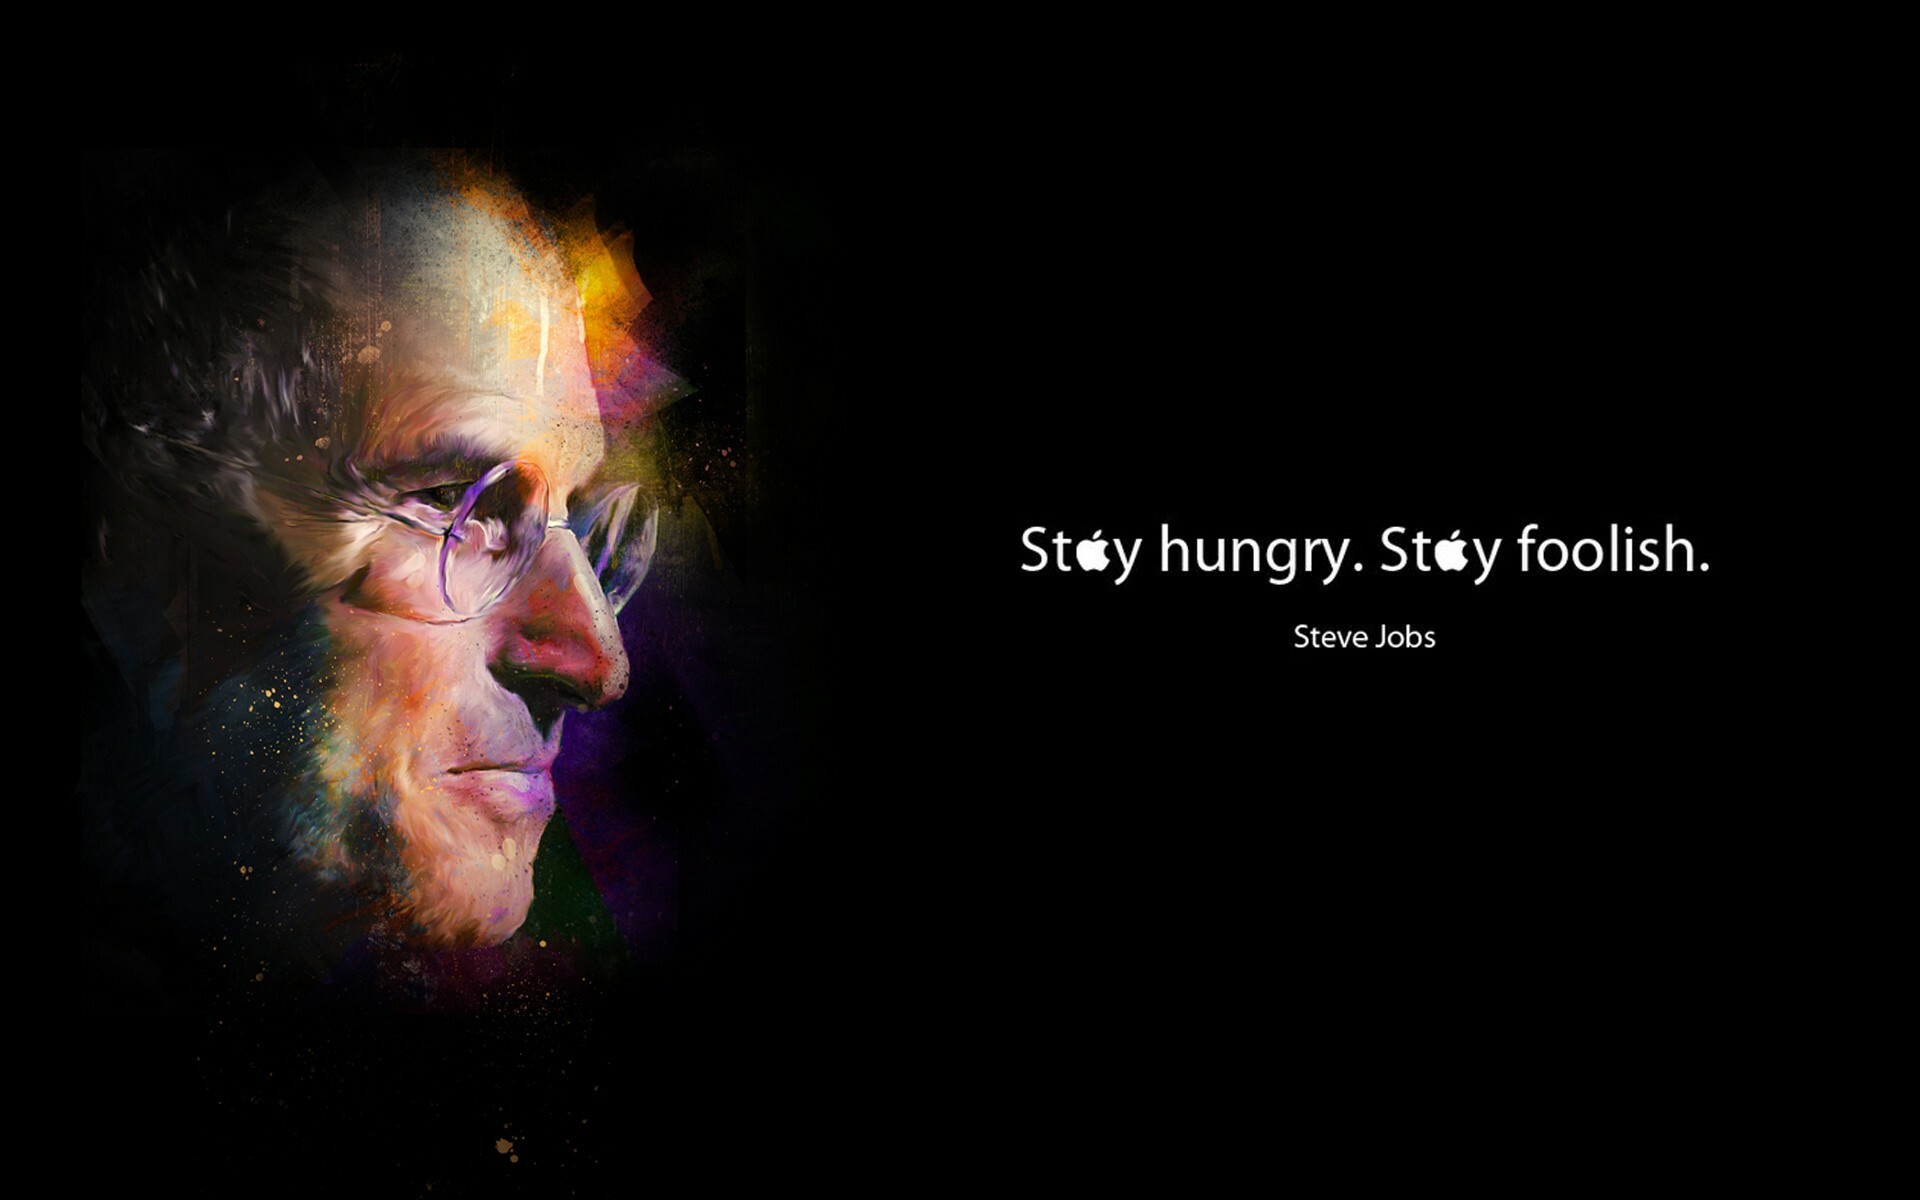 Steve Jobs: Apple co-founder, American manufacturer of personal computers, smartphones, tablet computers. 1920x1200 HD Wallpaper.